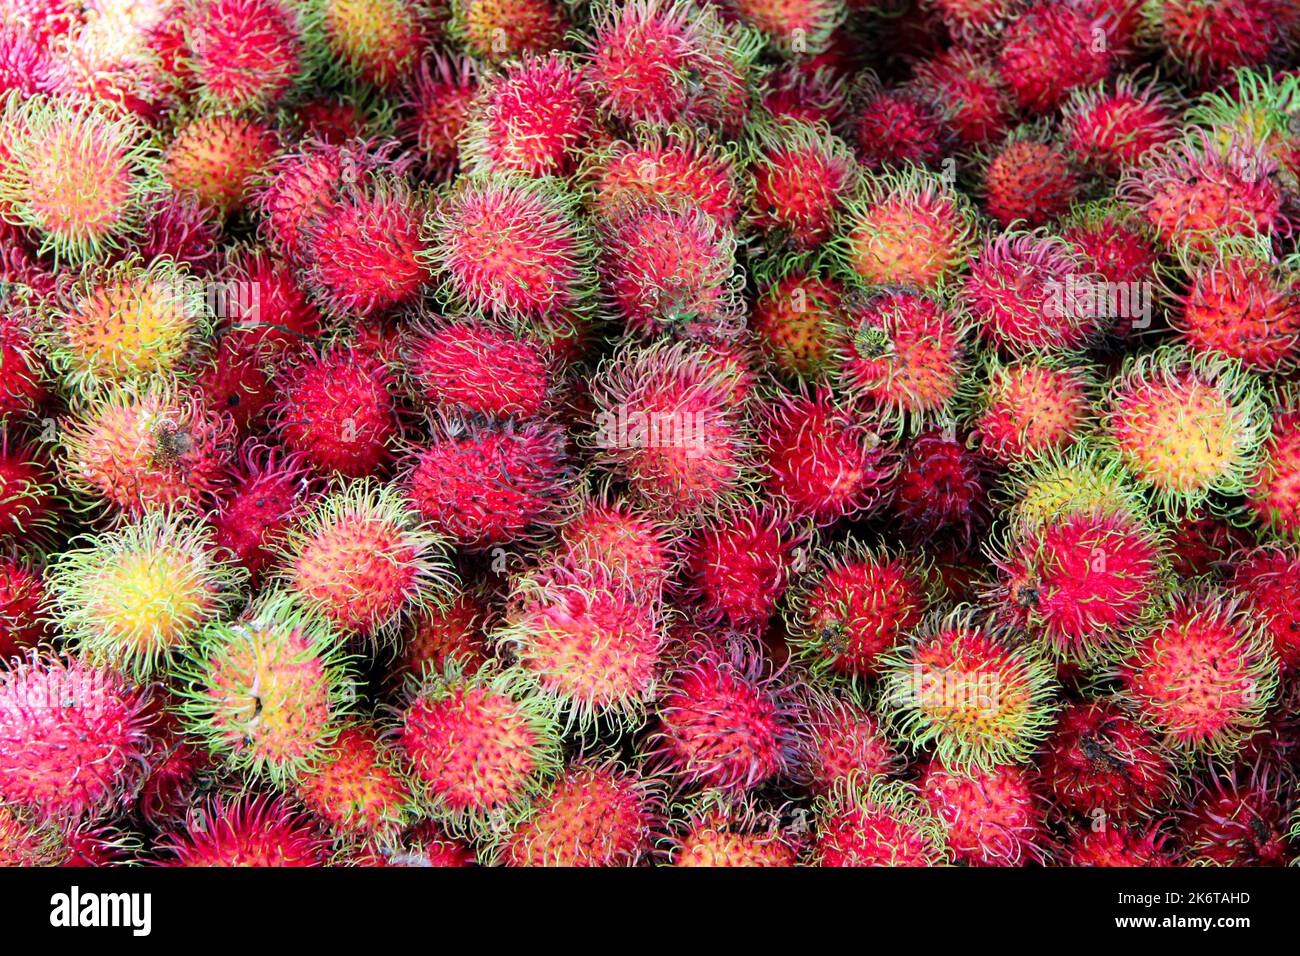 Photography of colourful magenta red fruits on the Australian market. A fresh and ripe bunch of Rambutans looking like hairy lychee. Stock Photo